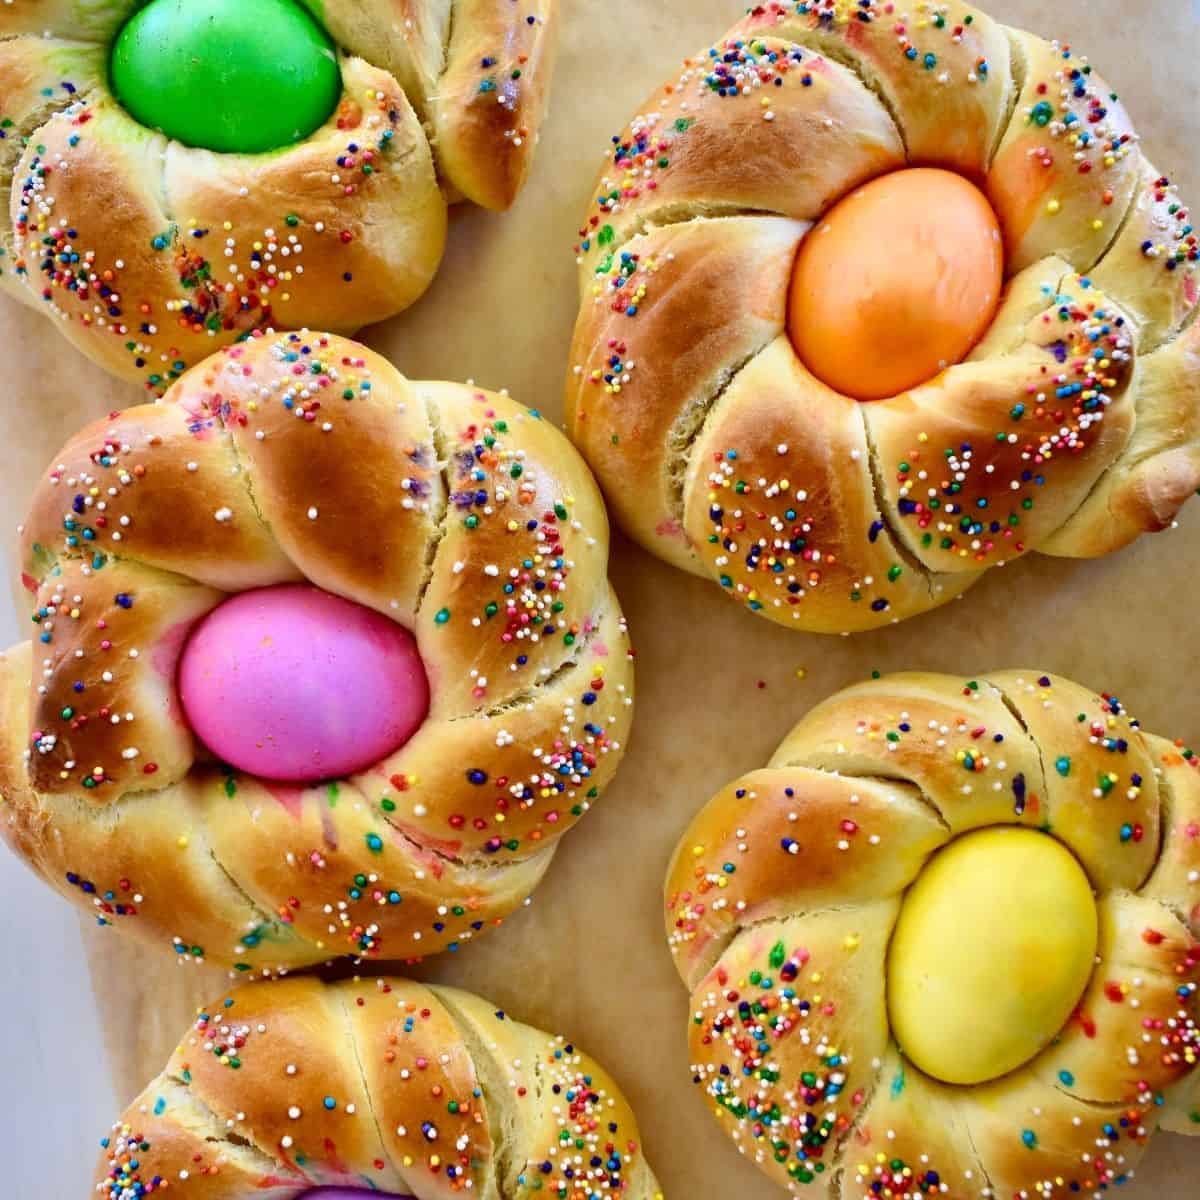 What is in easter bread